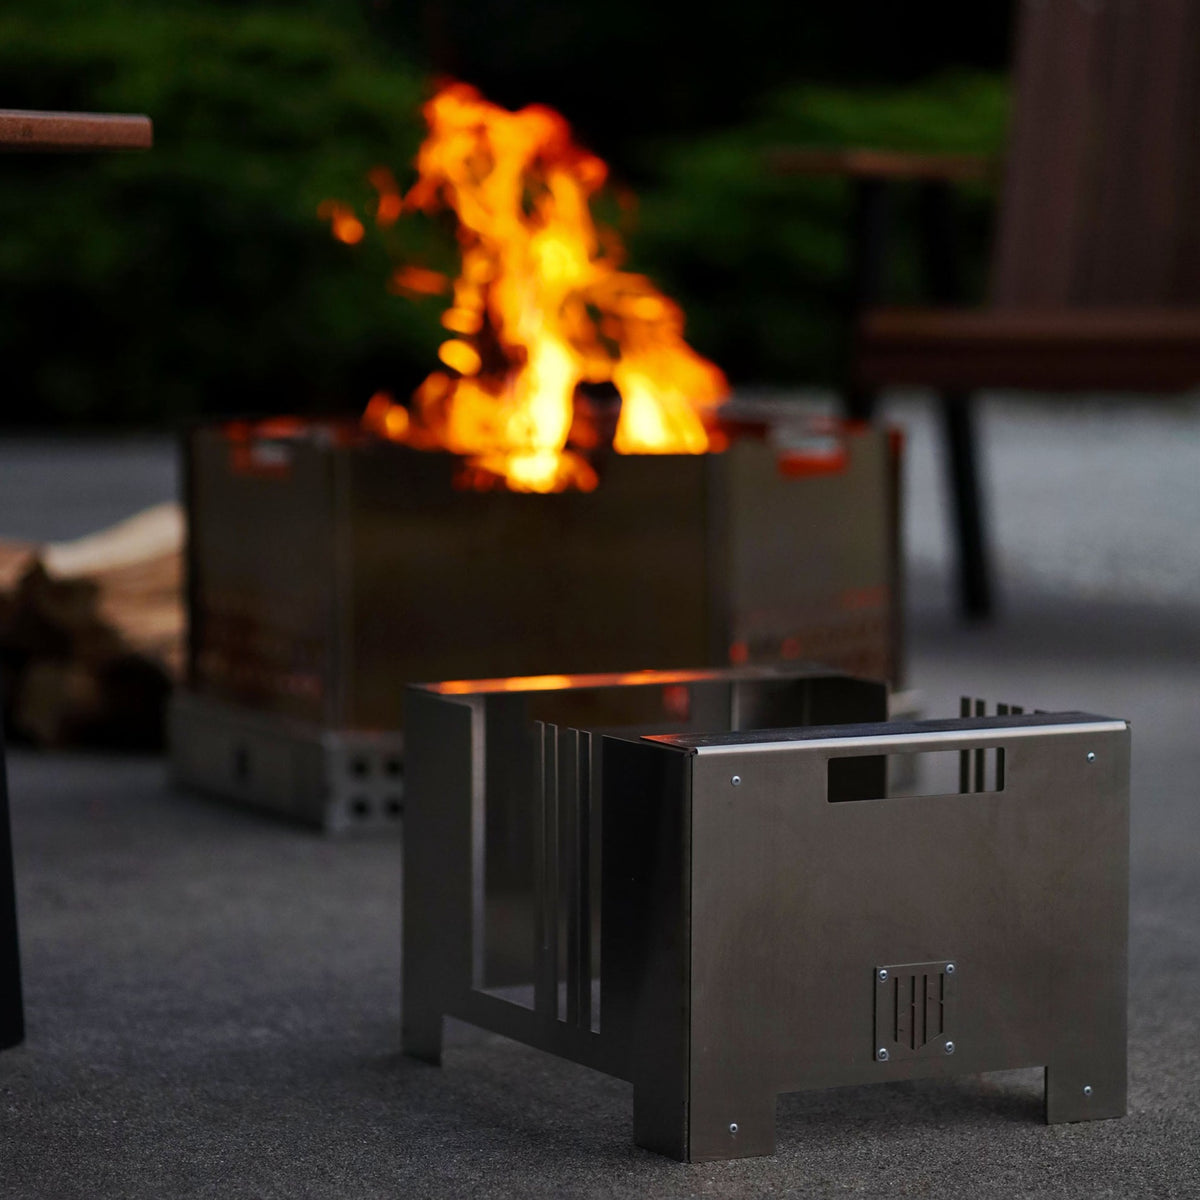 The 6 Series Smokeless Fire Pit Kit Holder